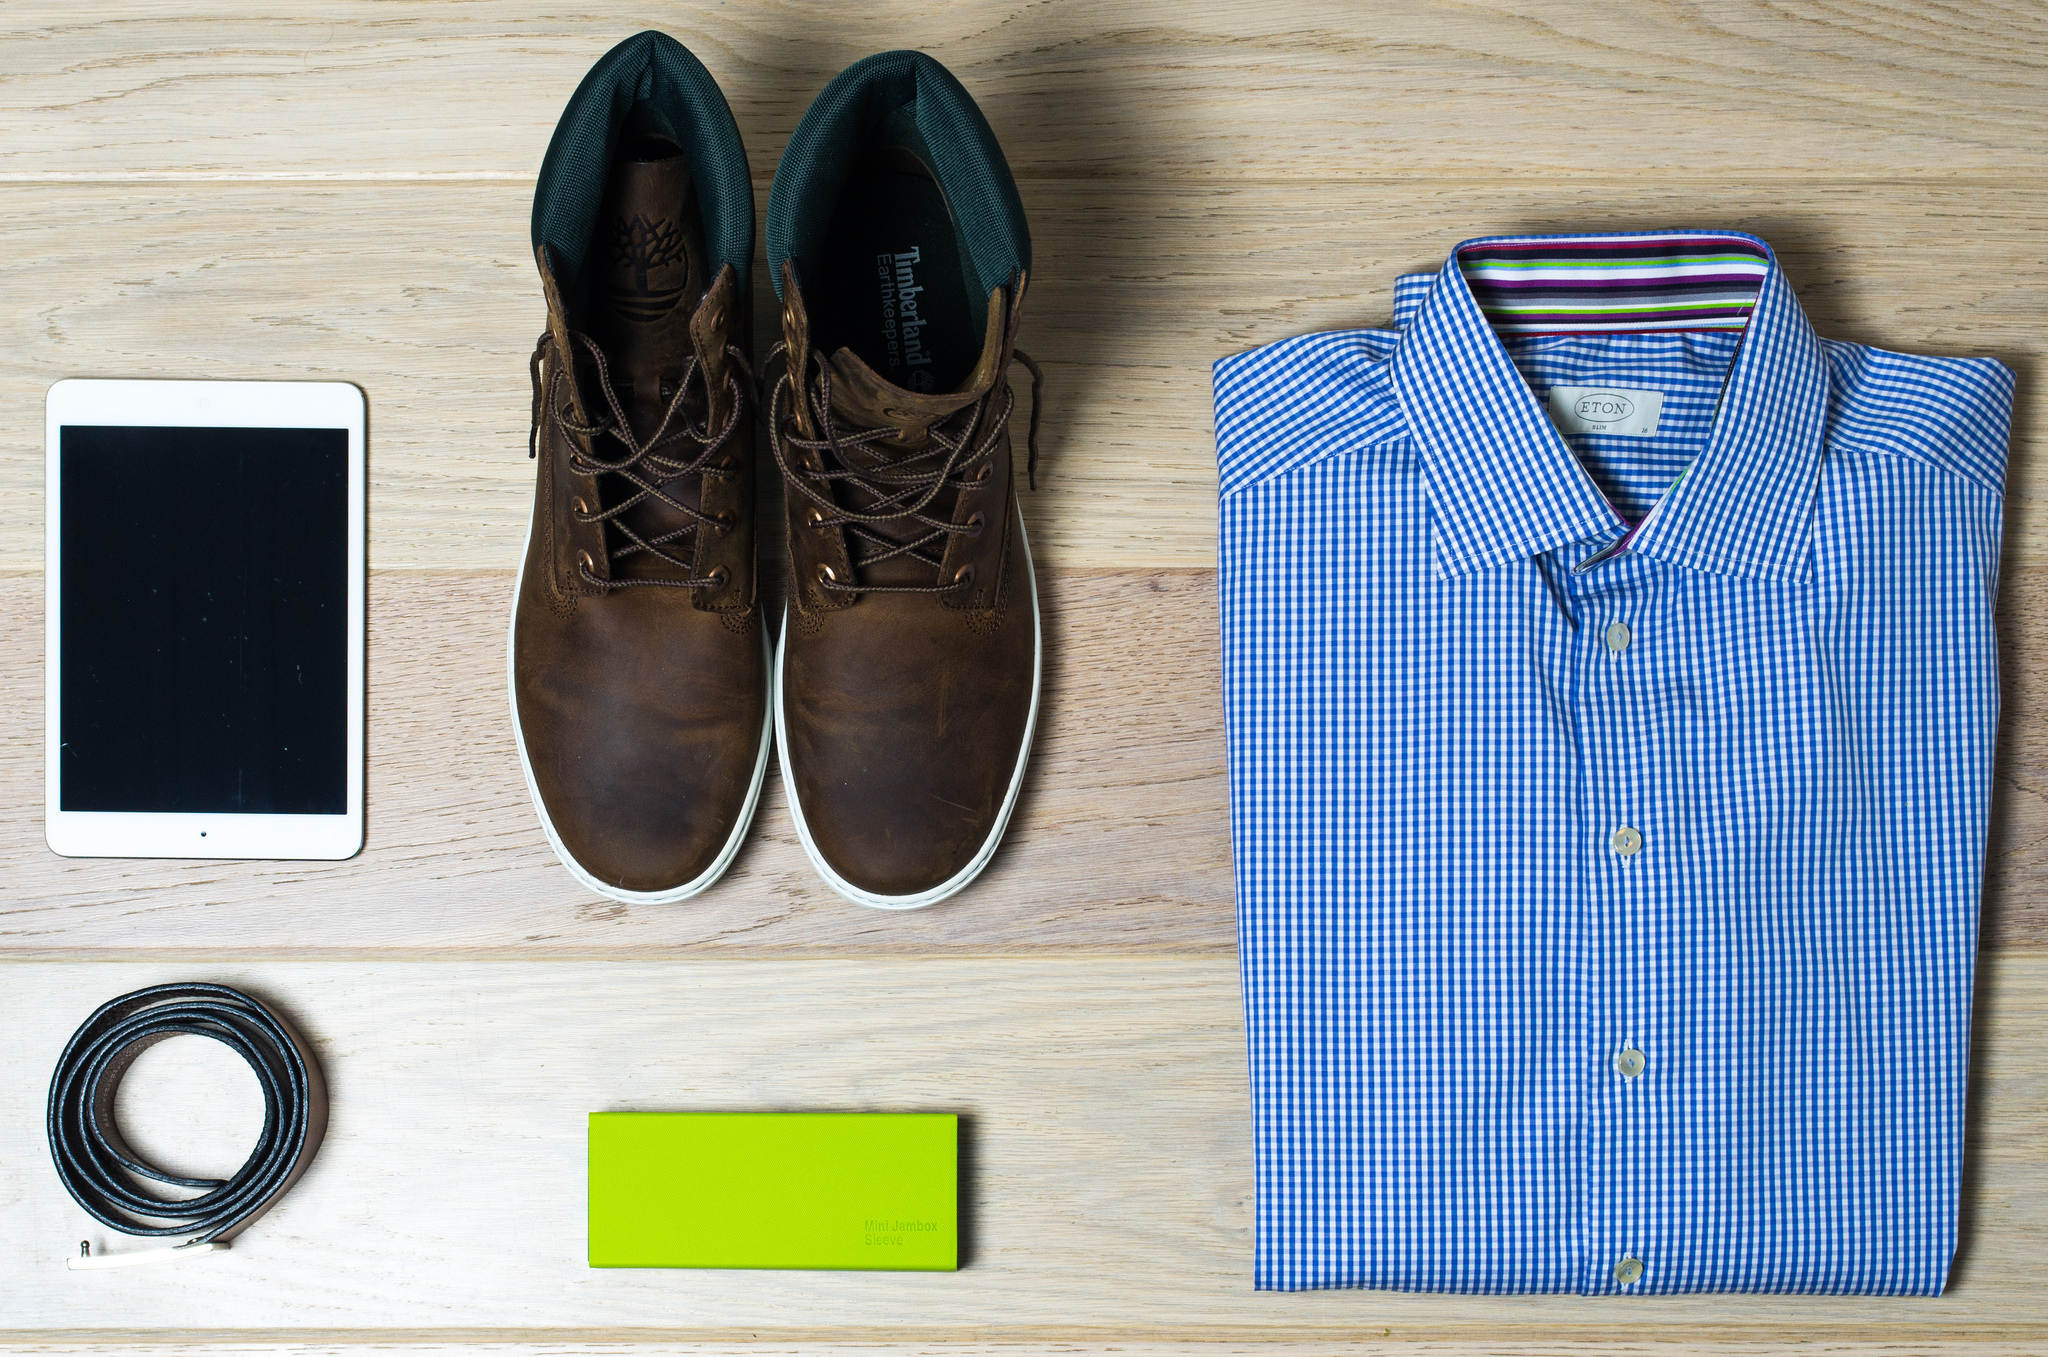 Photo of products: a pair of men's shoes, a folded blue men's shirt, an iPad.